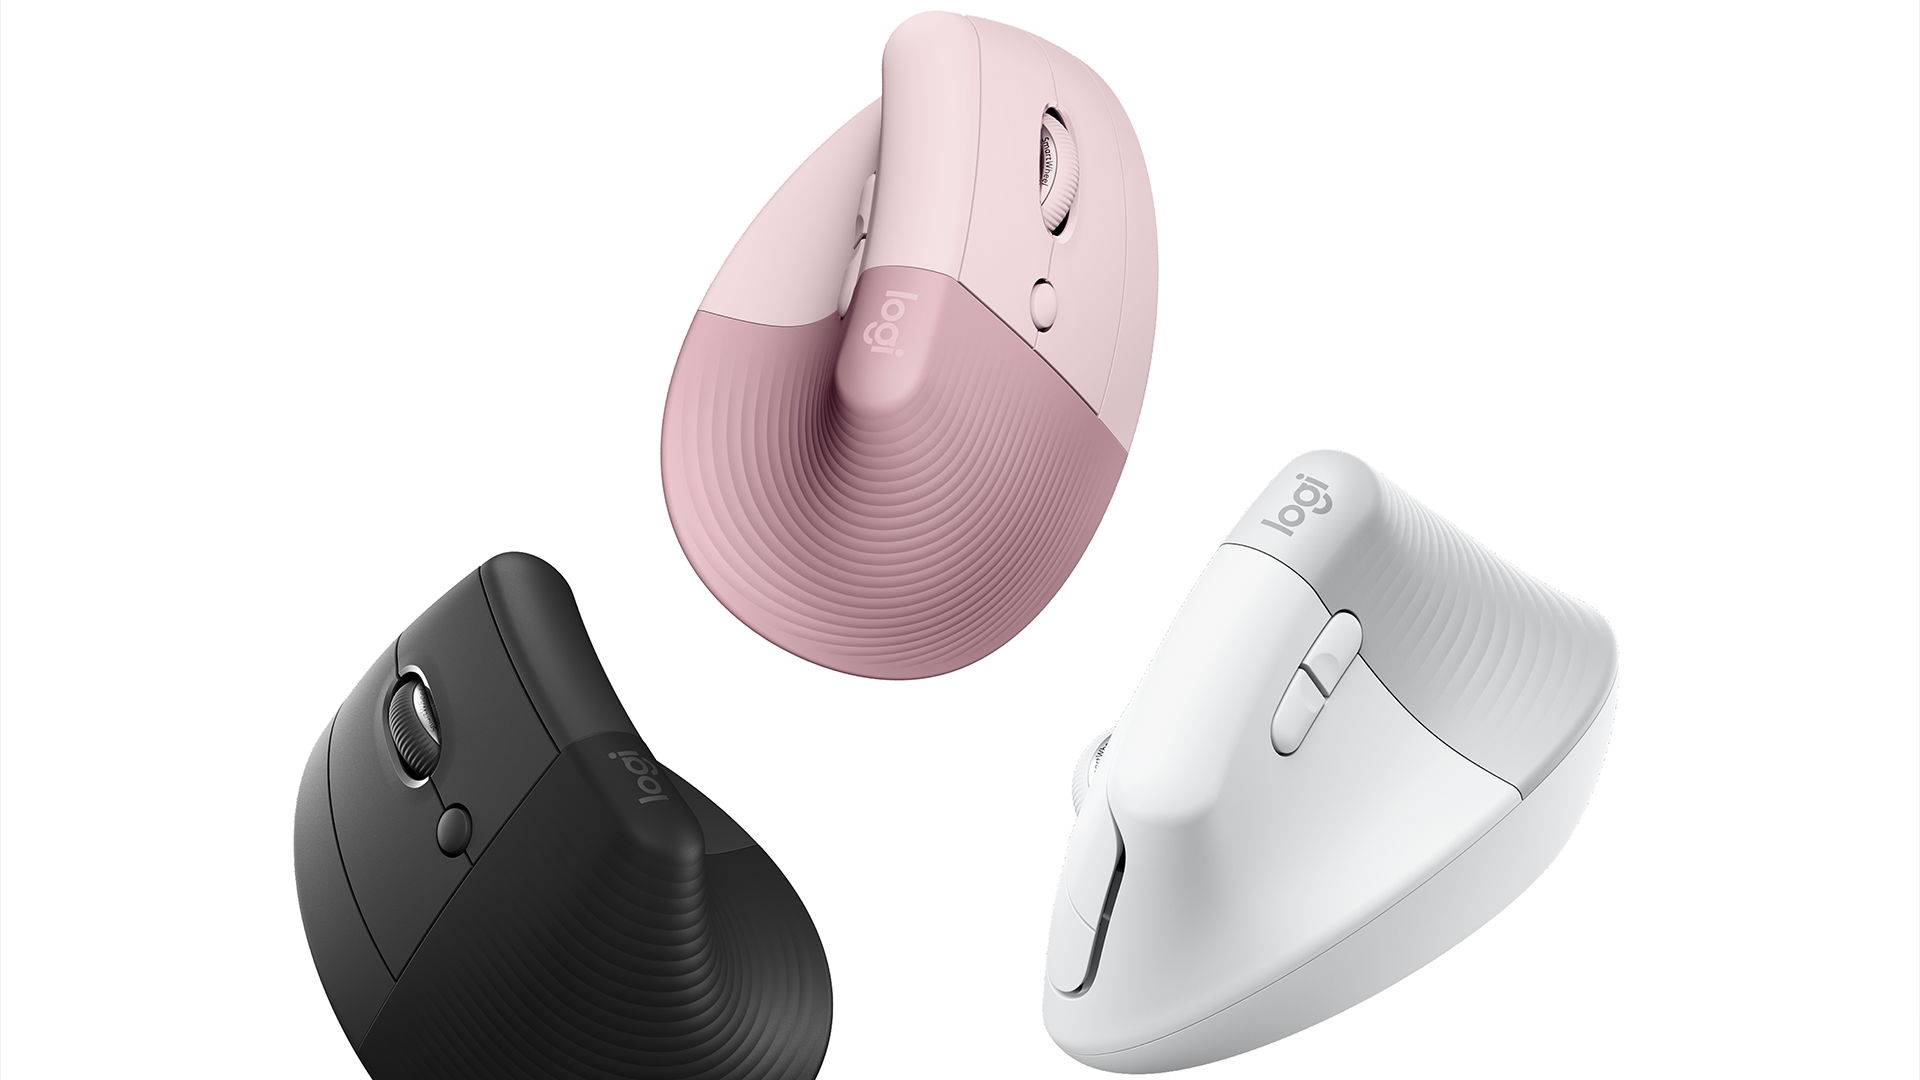 The Logitech Lift in pink, white, and graphite.